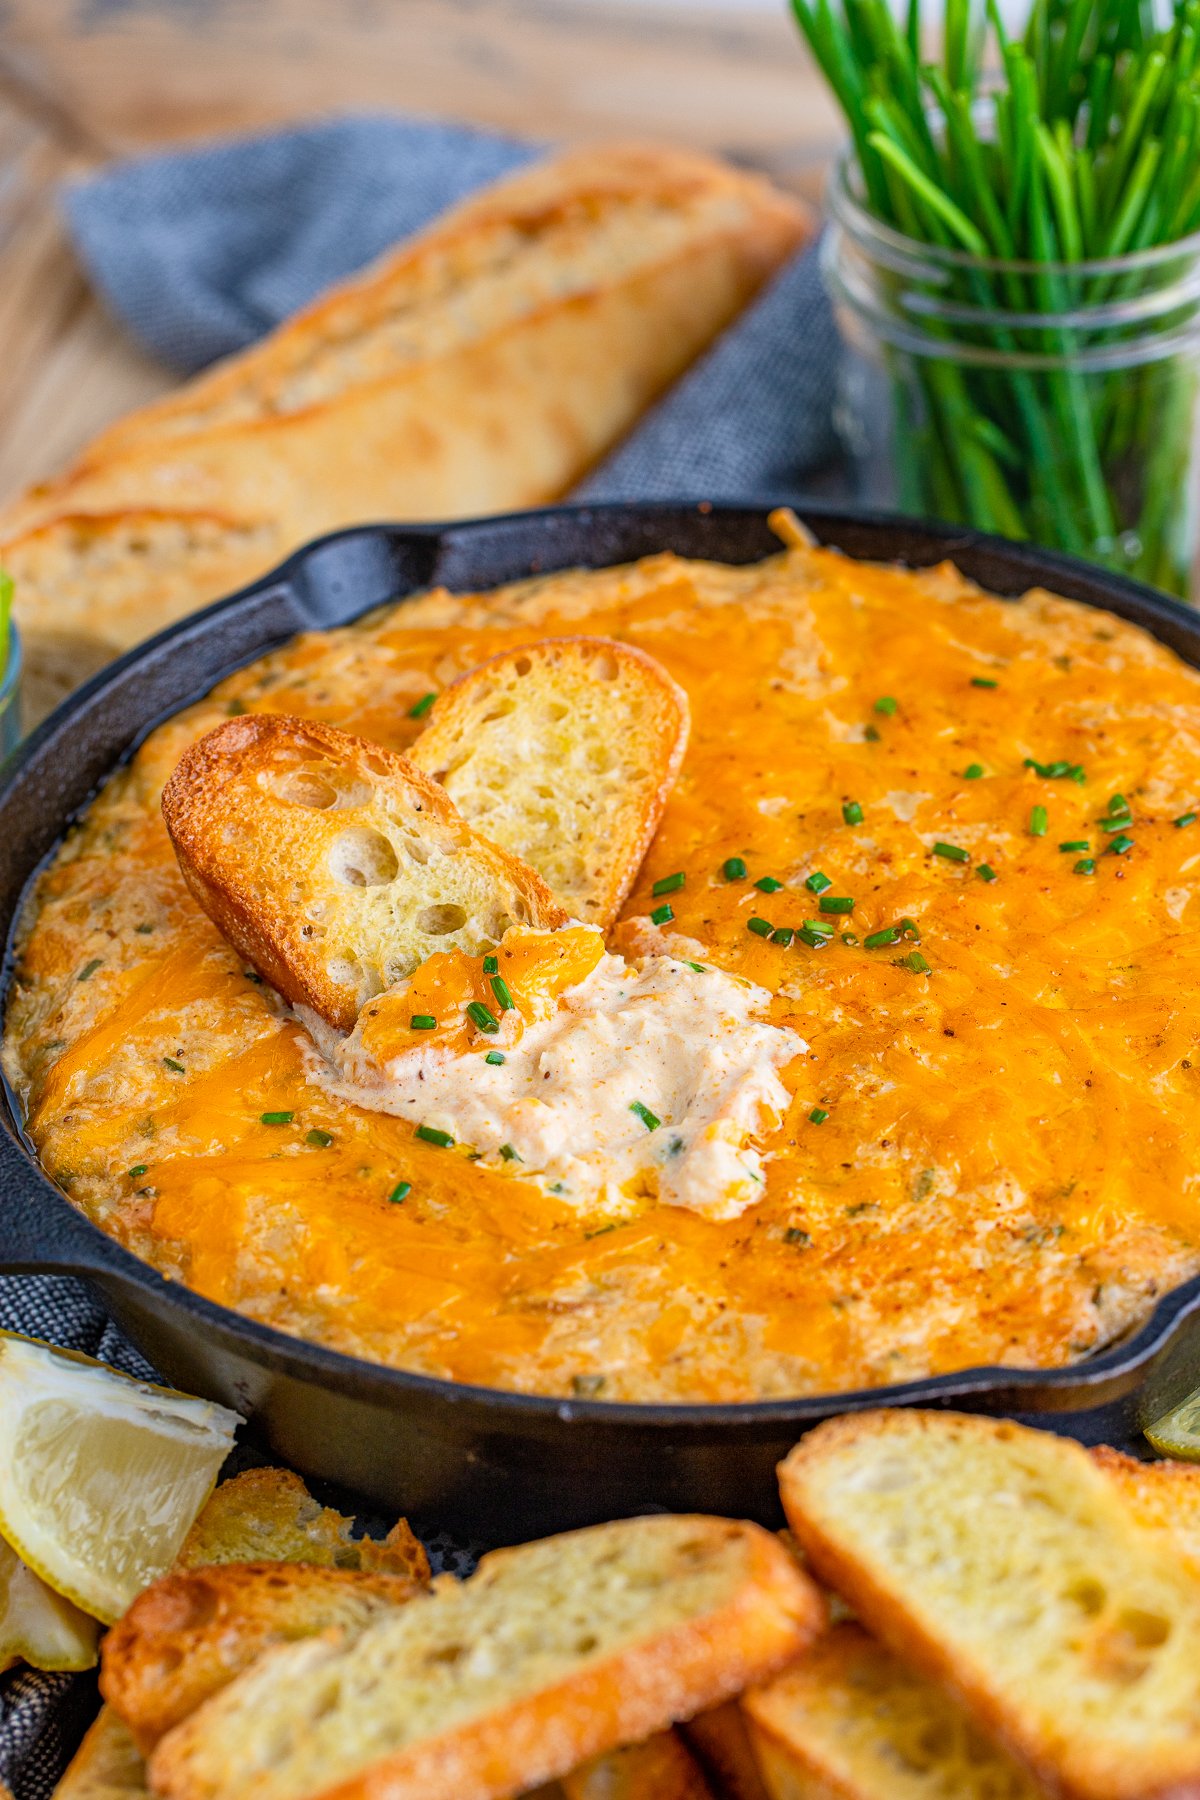 Two pieces of bread in Smoked Crab Dip Recipe.